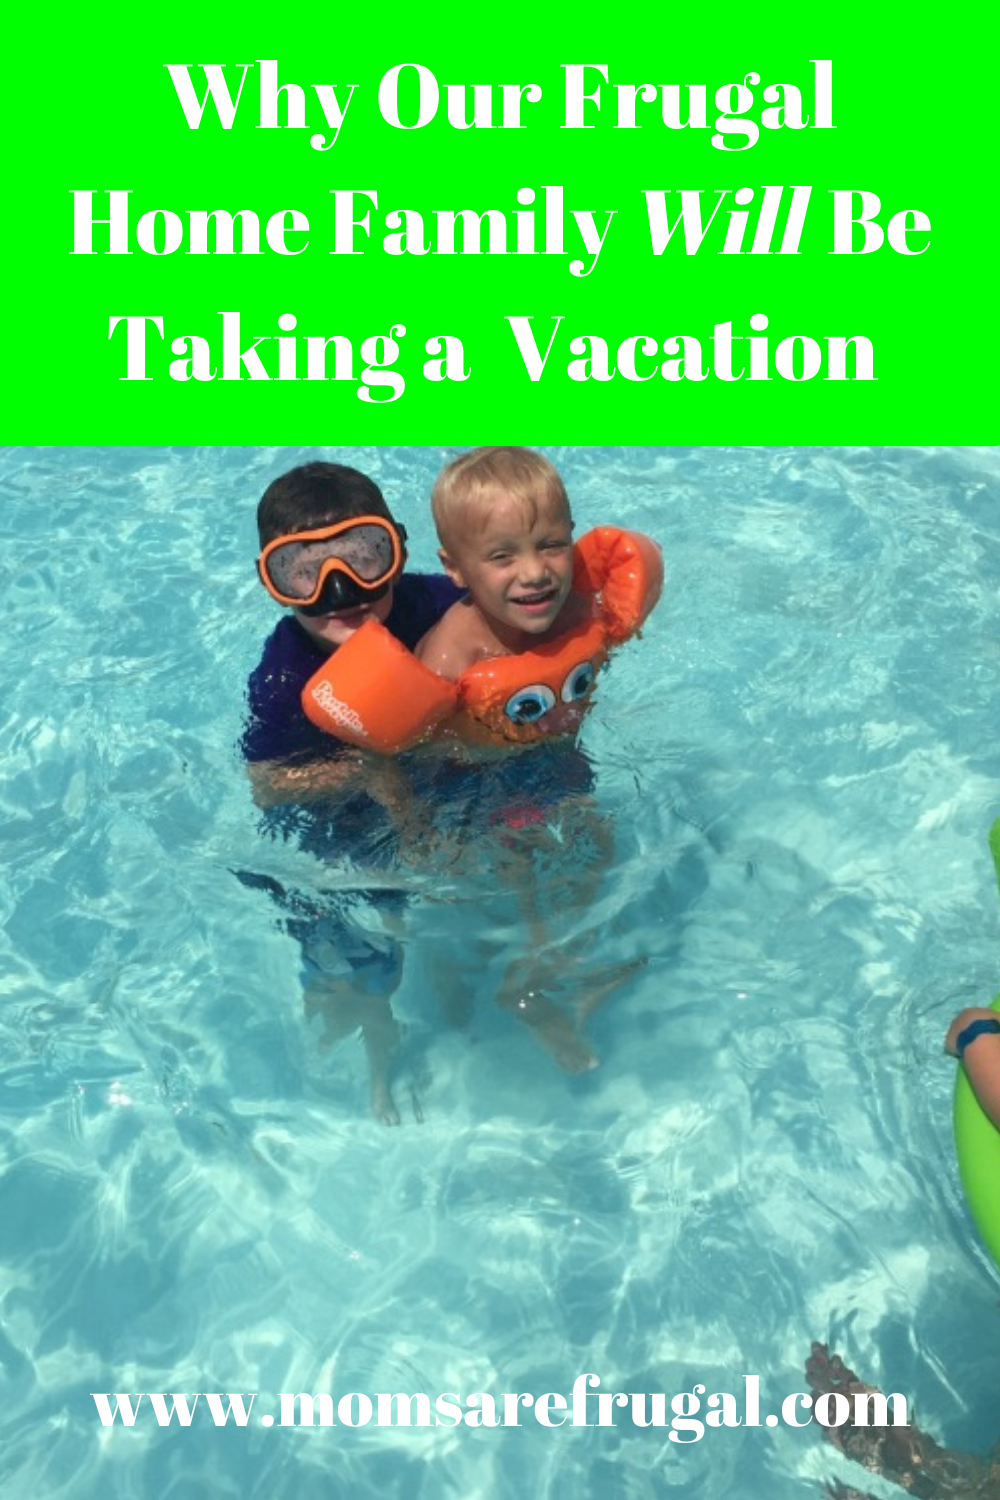 Why our Frugal Home Family Will Be Taking a Vacation This Year